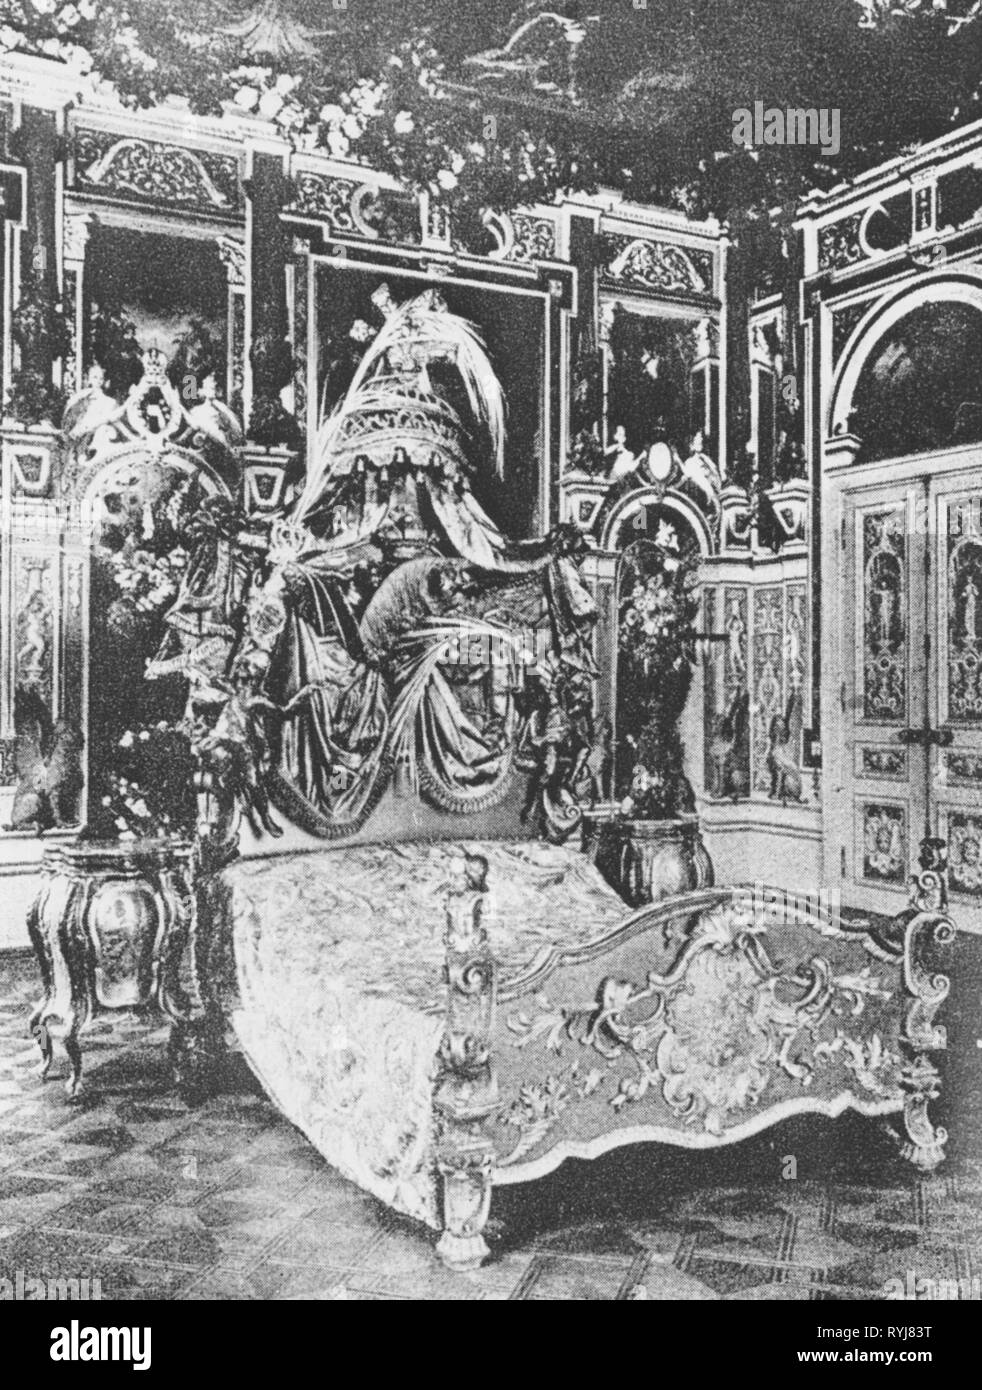 geography / travel, Austria, Vienna, building, Hermesvilla, interior view, bedroom of the Empress Elizabeth, bed, 20th century, Sisi, Sissi, Hermes villa, room, rooms, furniture, state bed, Europe, building, buildings, bedroom, bedrooms, bed, beds, historic, historical, Additional-Rights-Clearance-Info-Not-Available Stock Photo